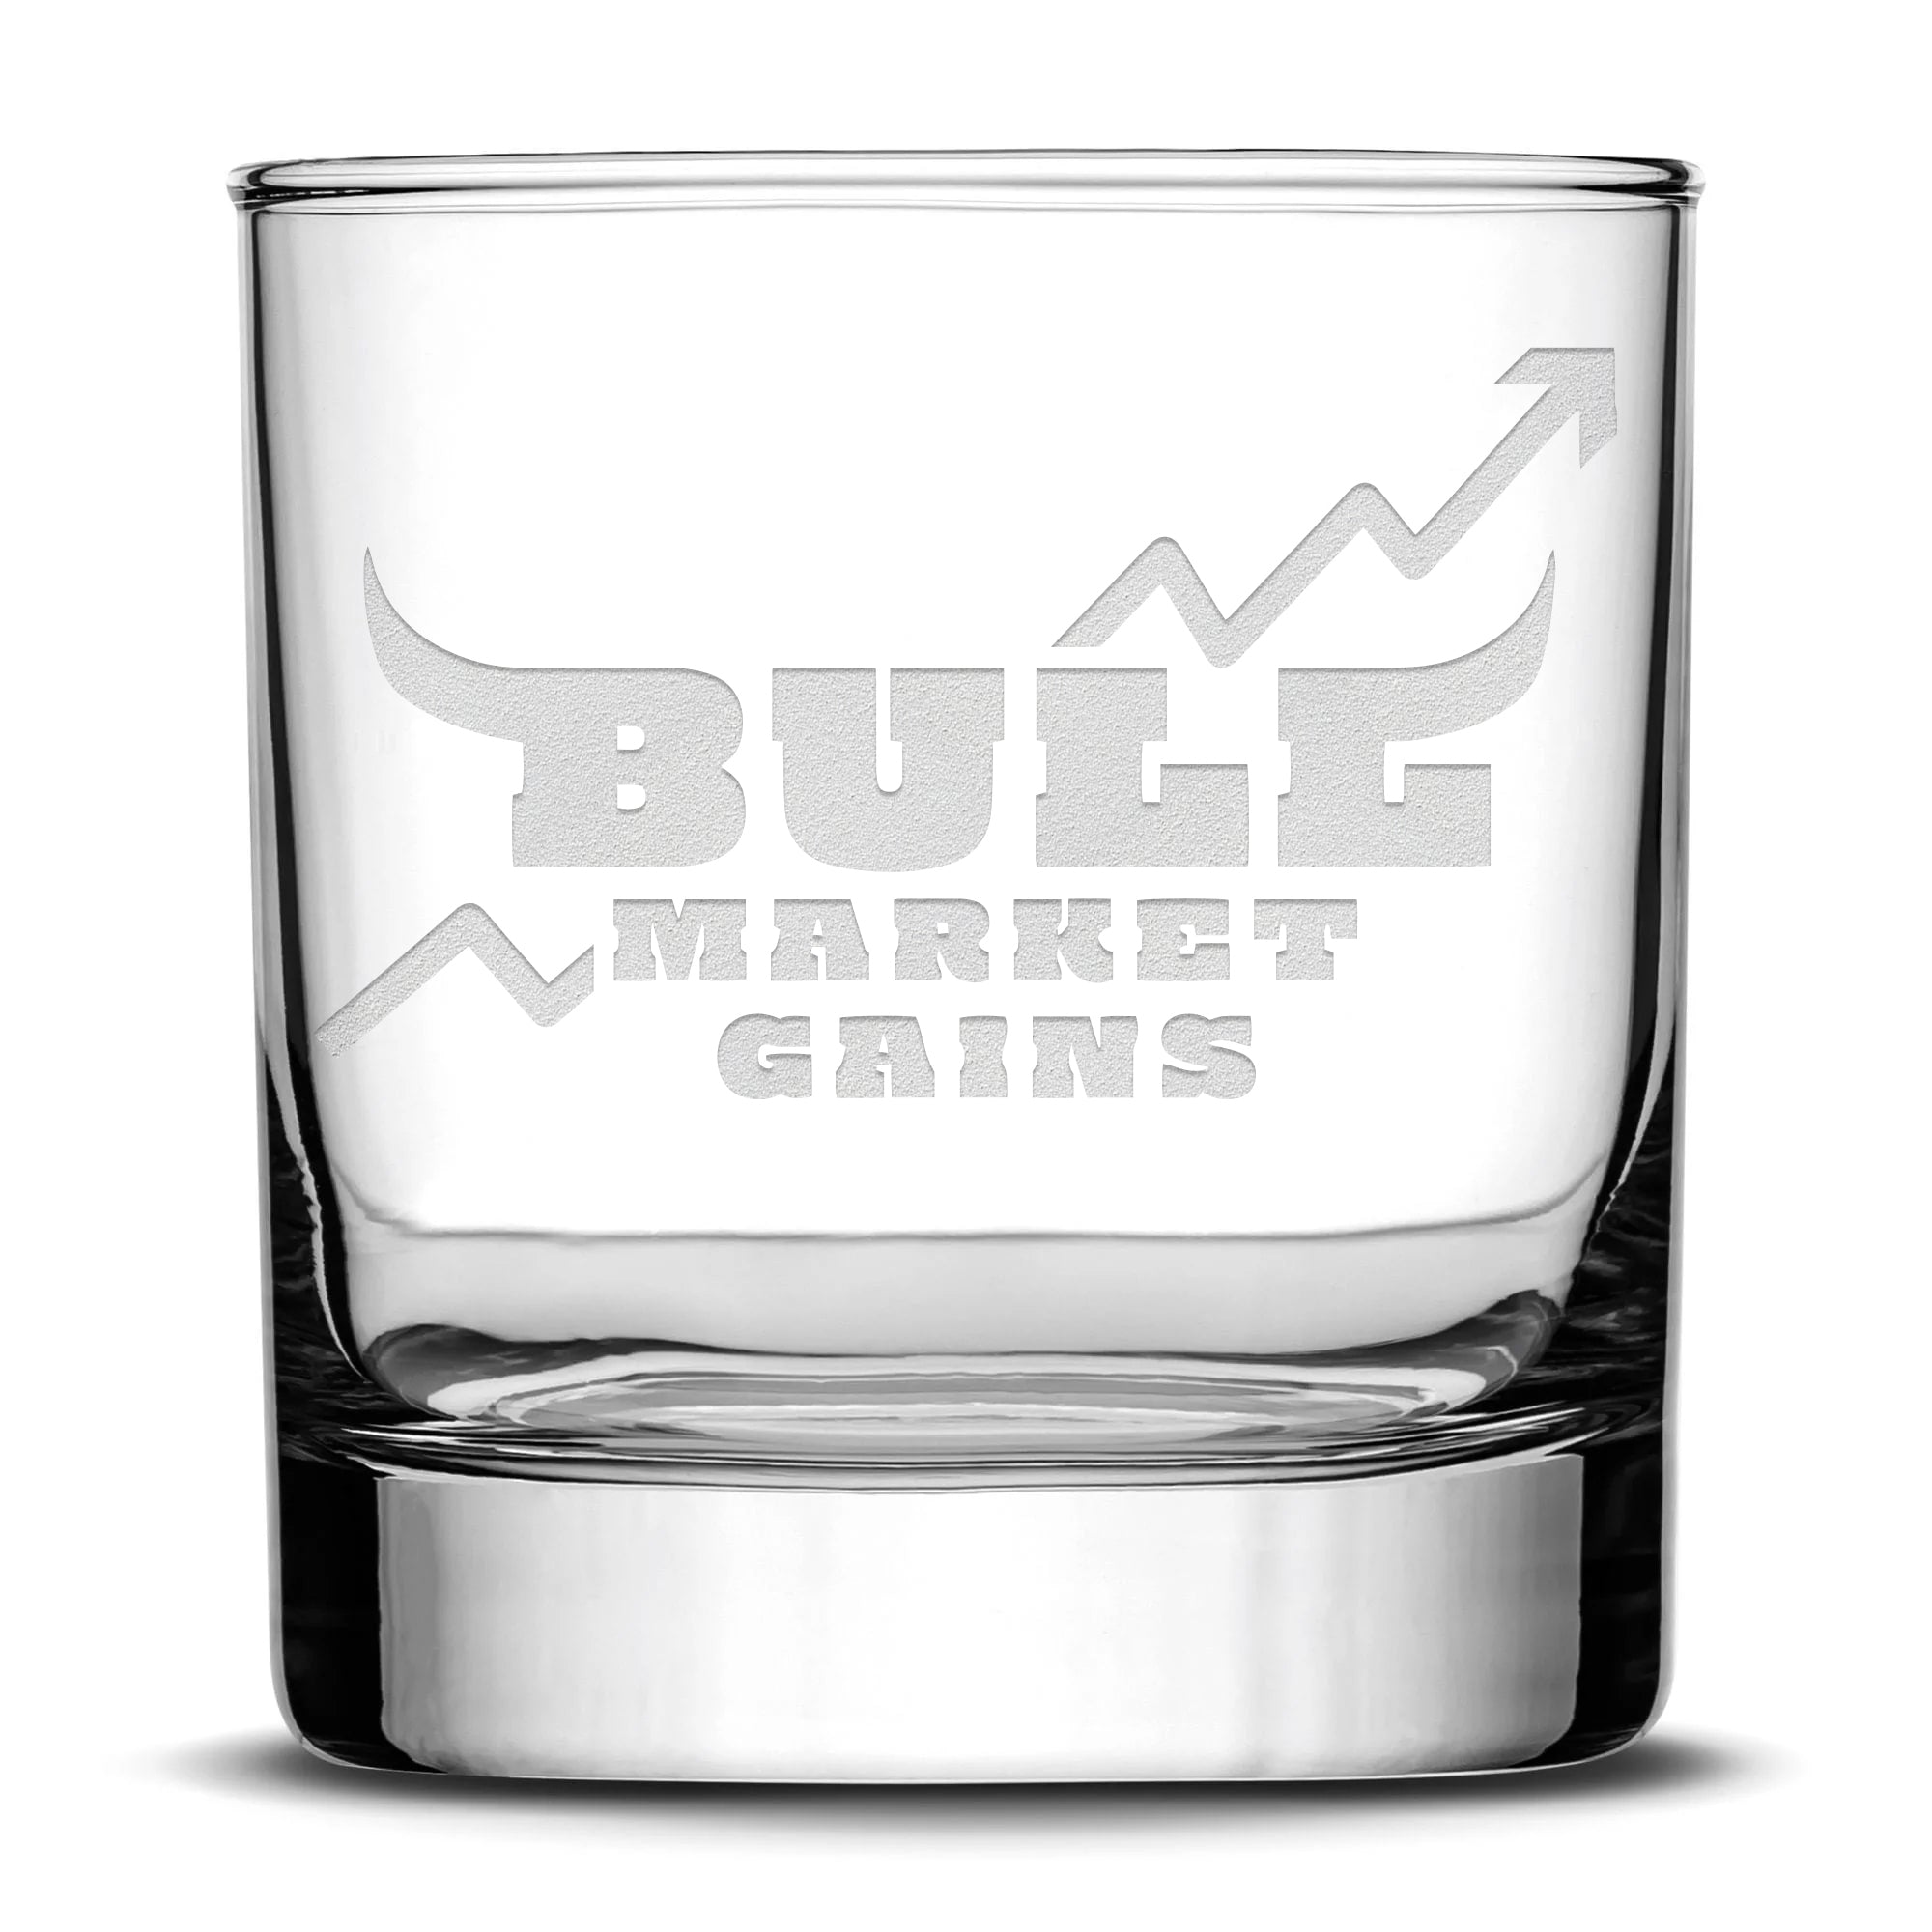 Integrity Bottles Premium, Bull Market Gains, Whiskey Glass, Hand Made in USA, Laser Etched or Hand Etched, 11oz